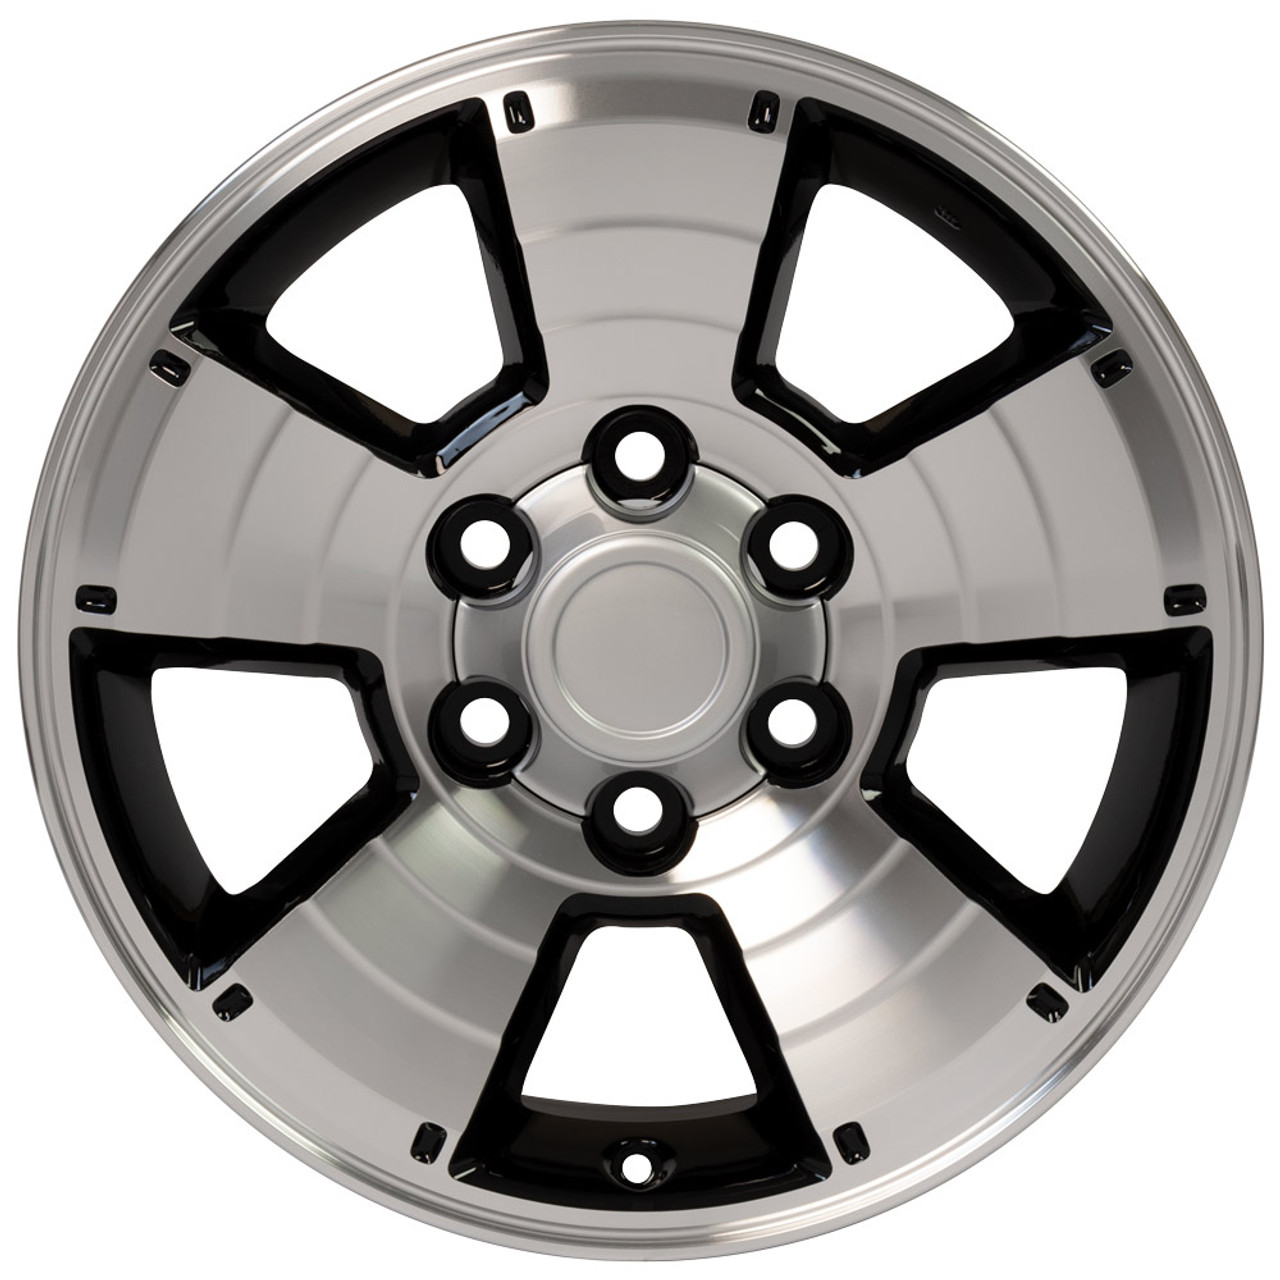 17 Fits Toyota 4 Runner Tacoma Tundra Sequoia Lexus Wheel Black Machined Face Set Of 4 17x7 5 Rims Stock Wheel Solutions